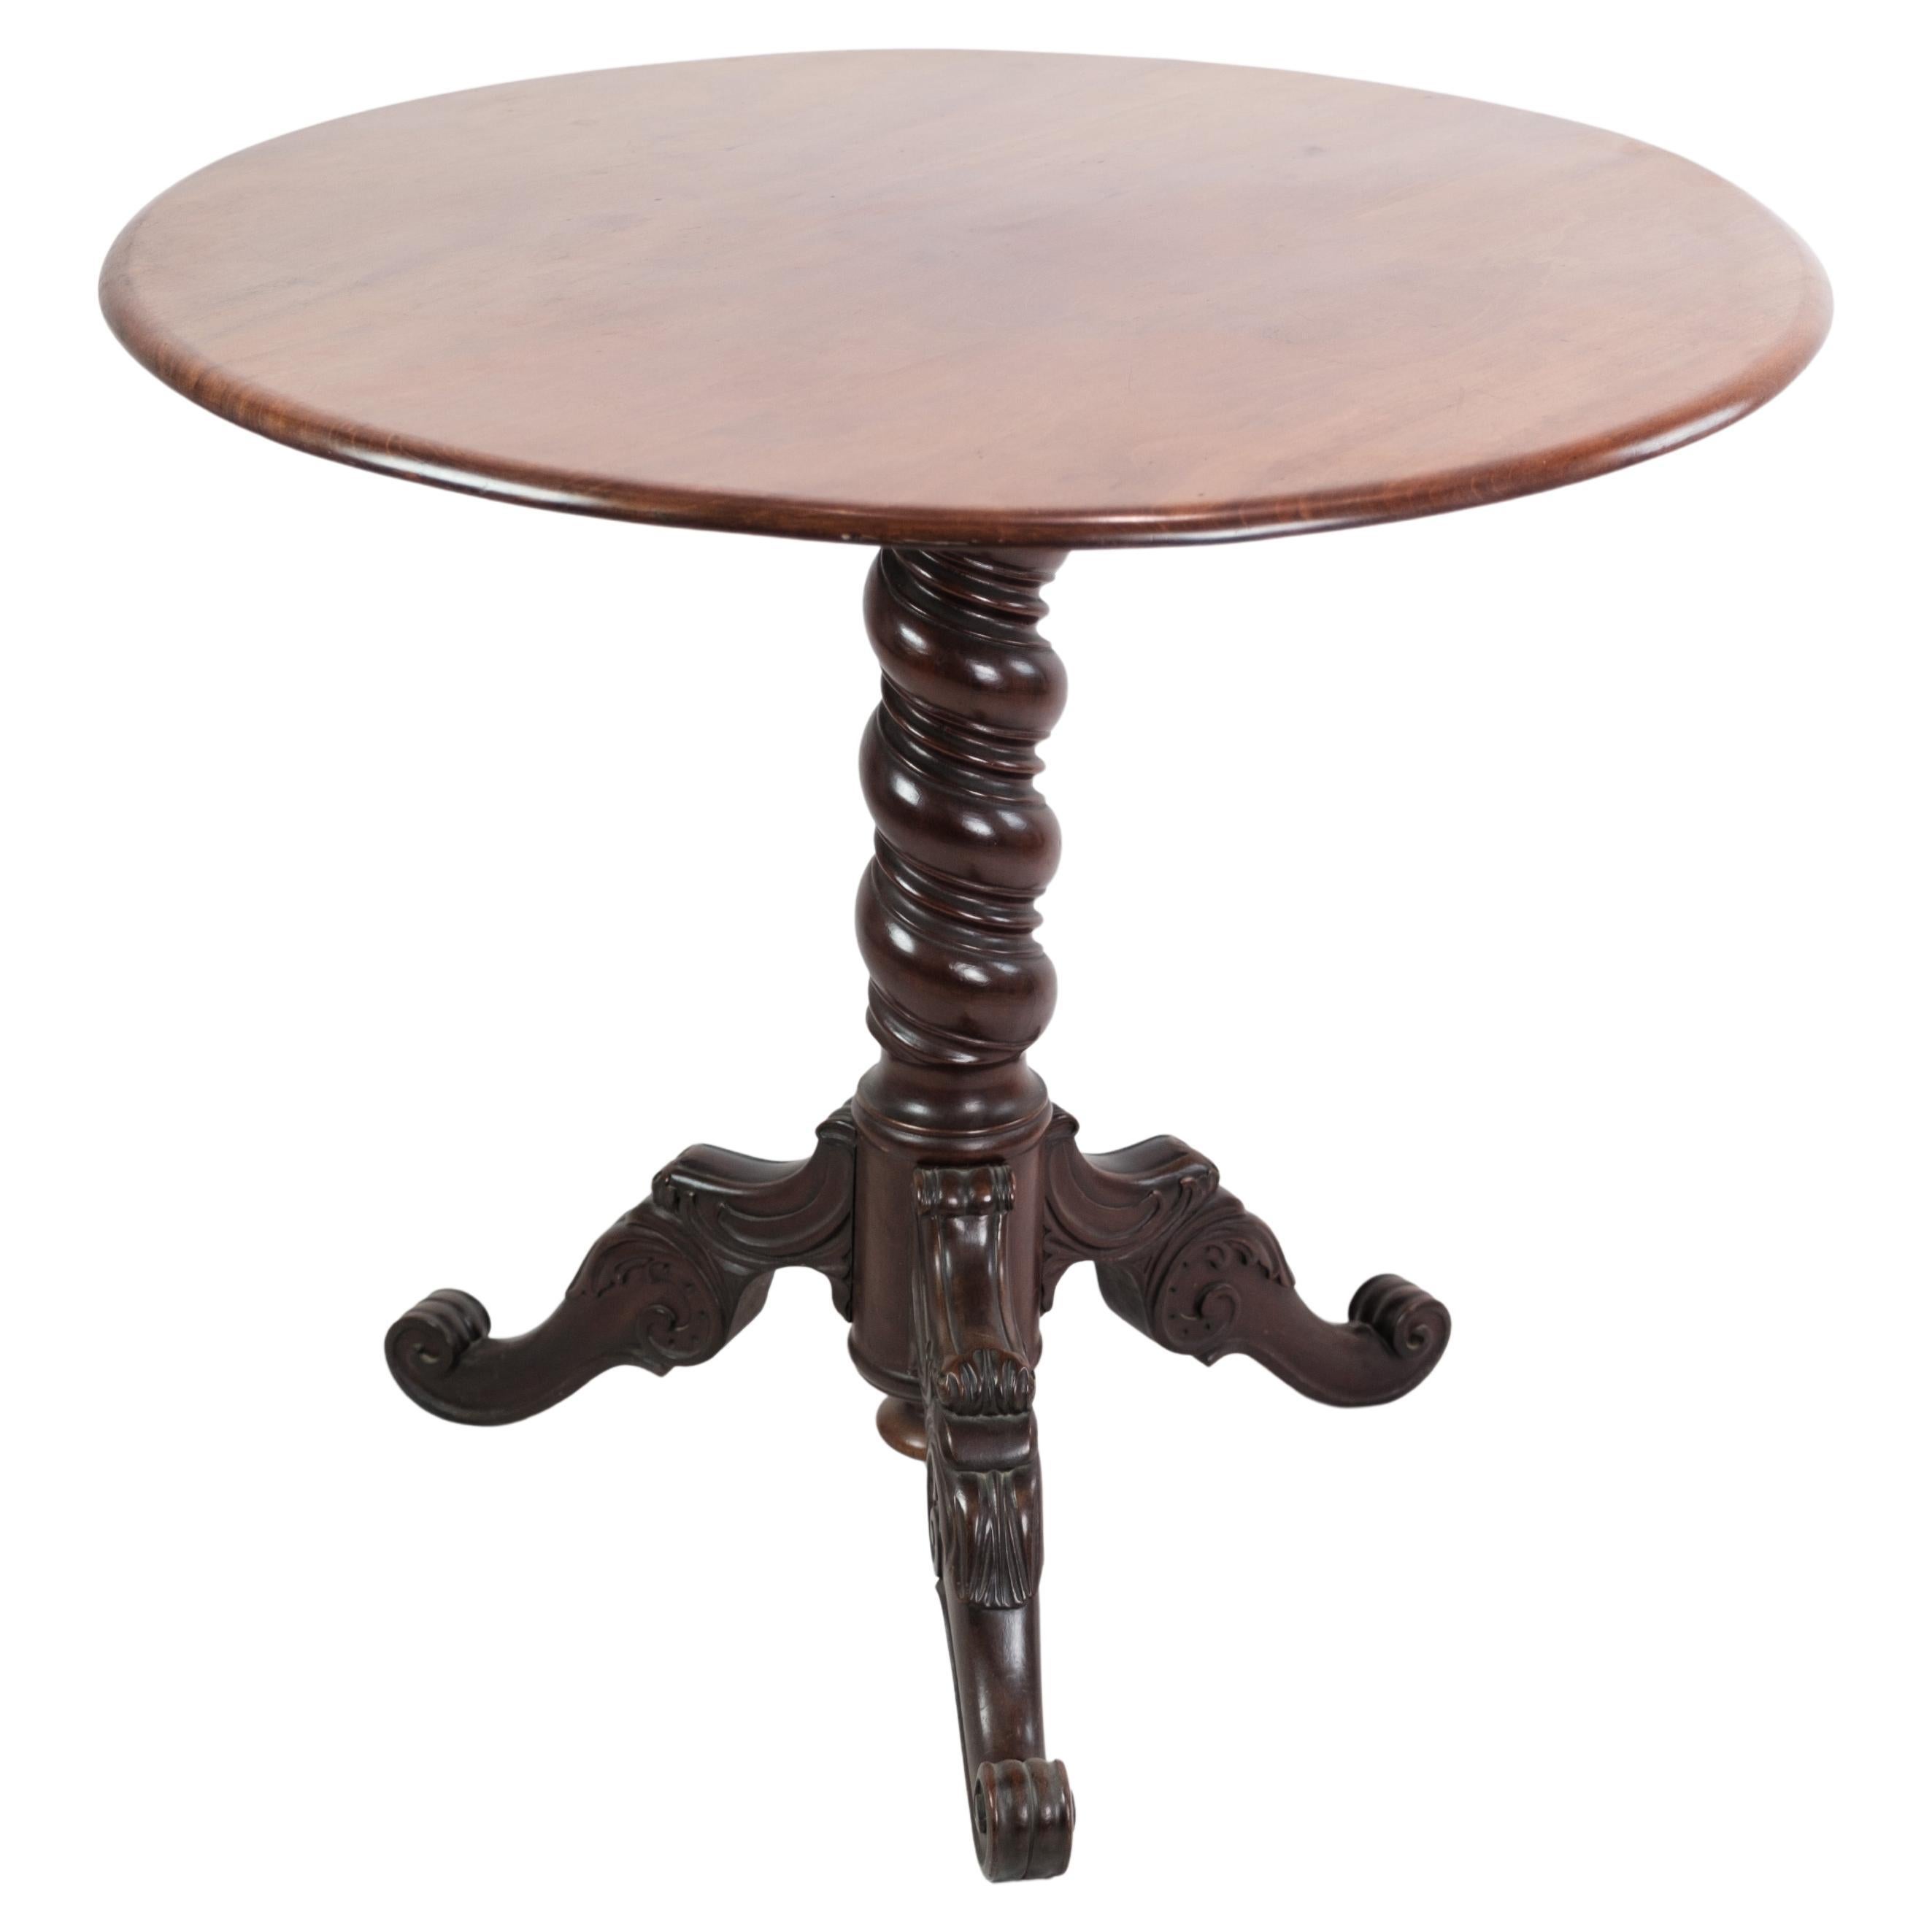 Pedestal Table/Side Table Originating From Denmark Made In Mahogany From 1860s